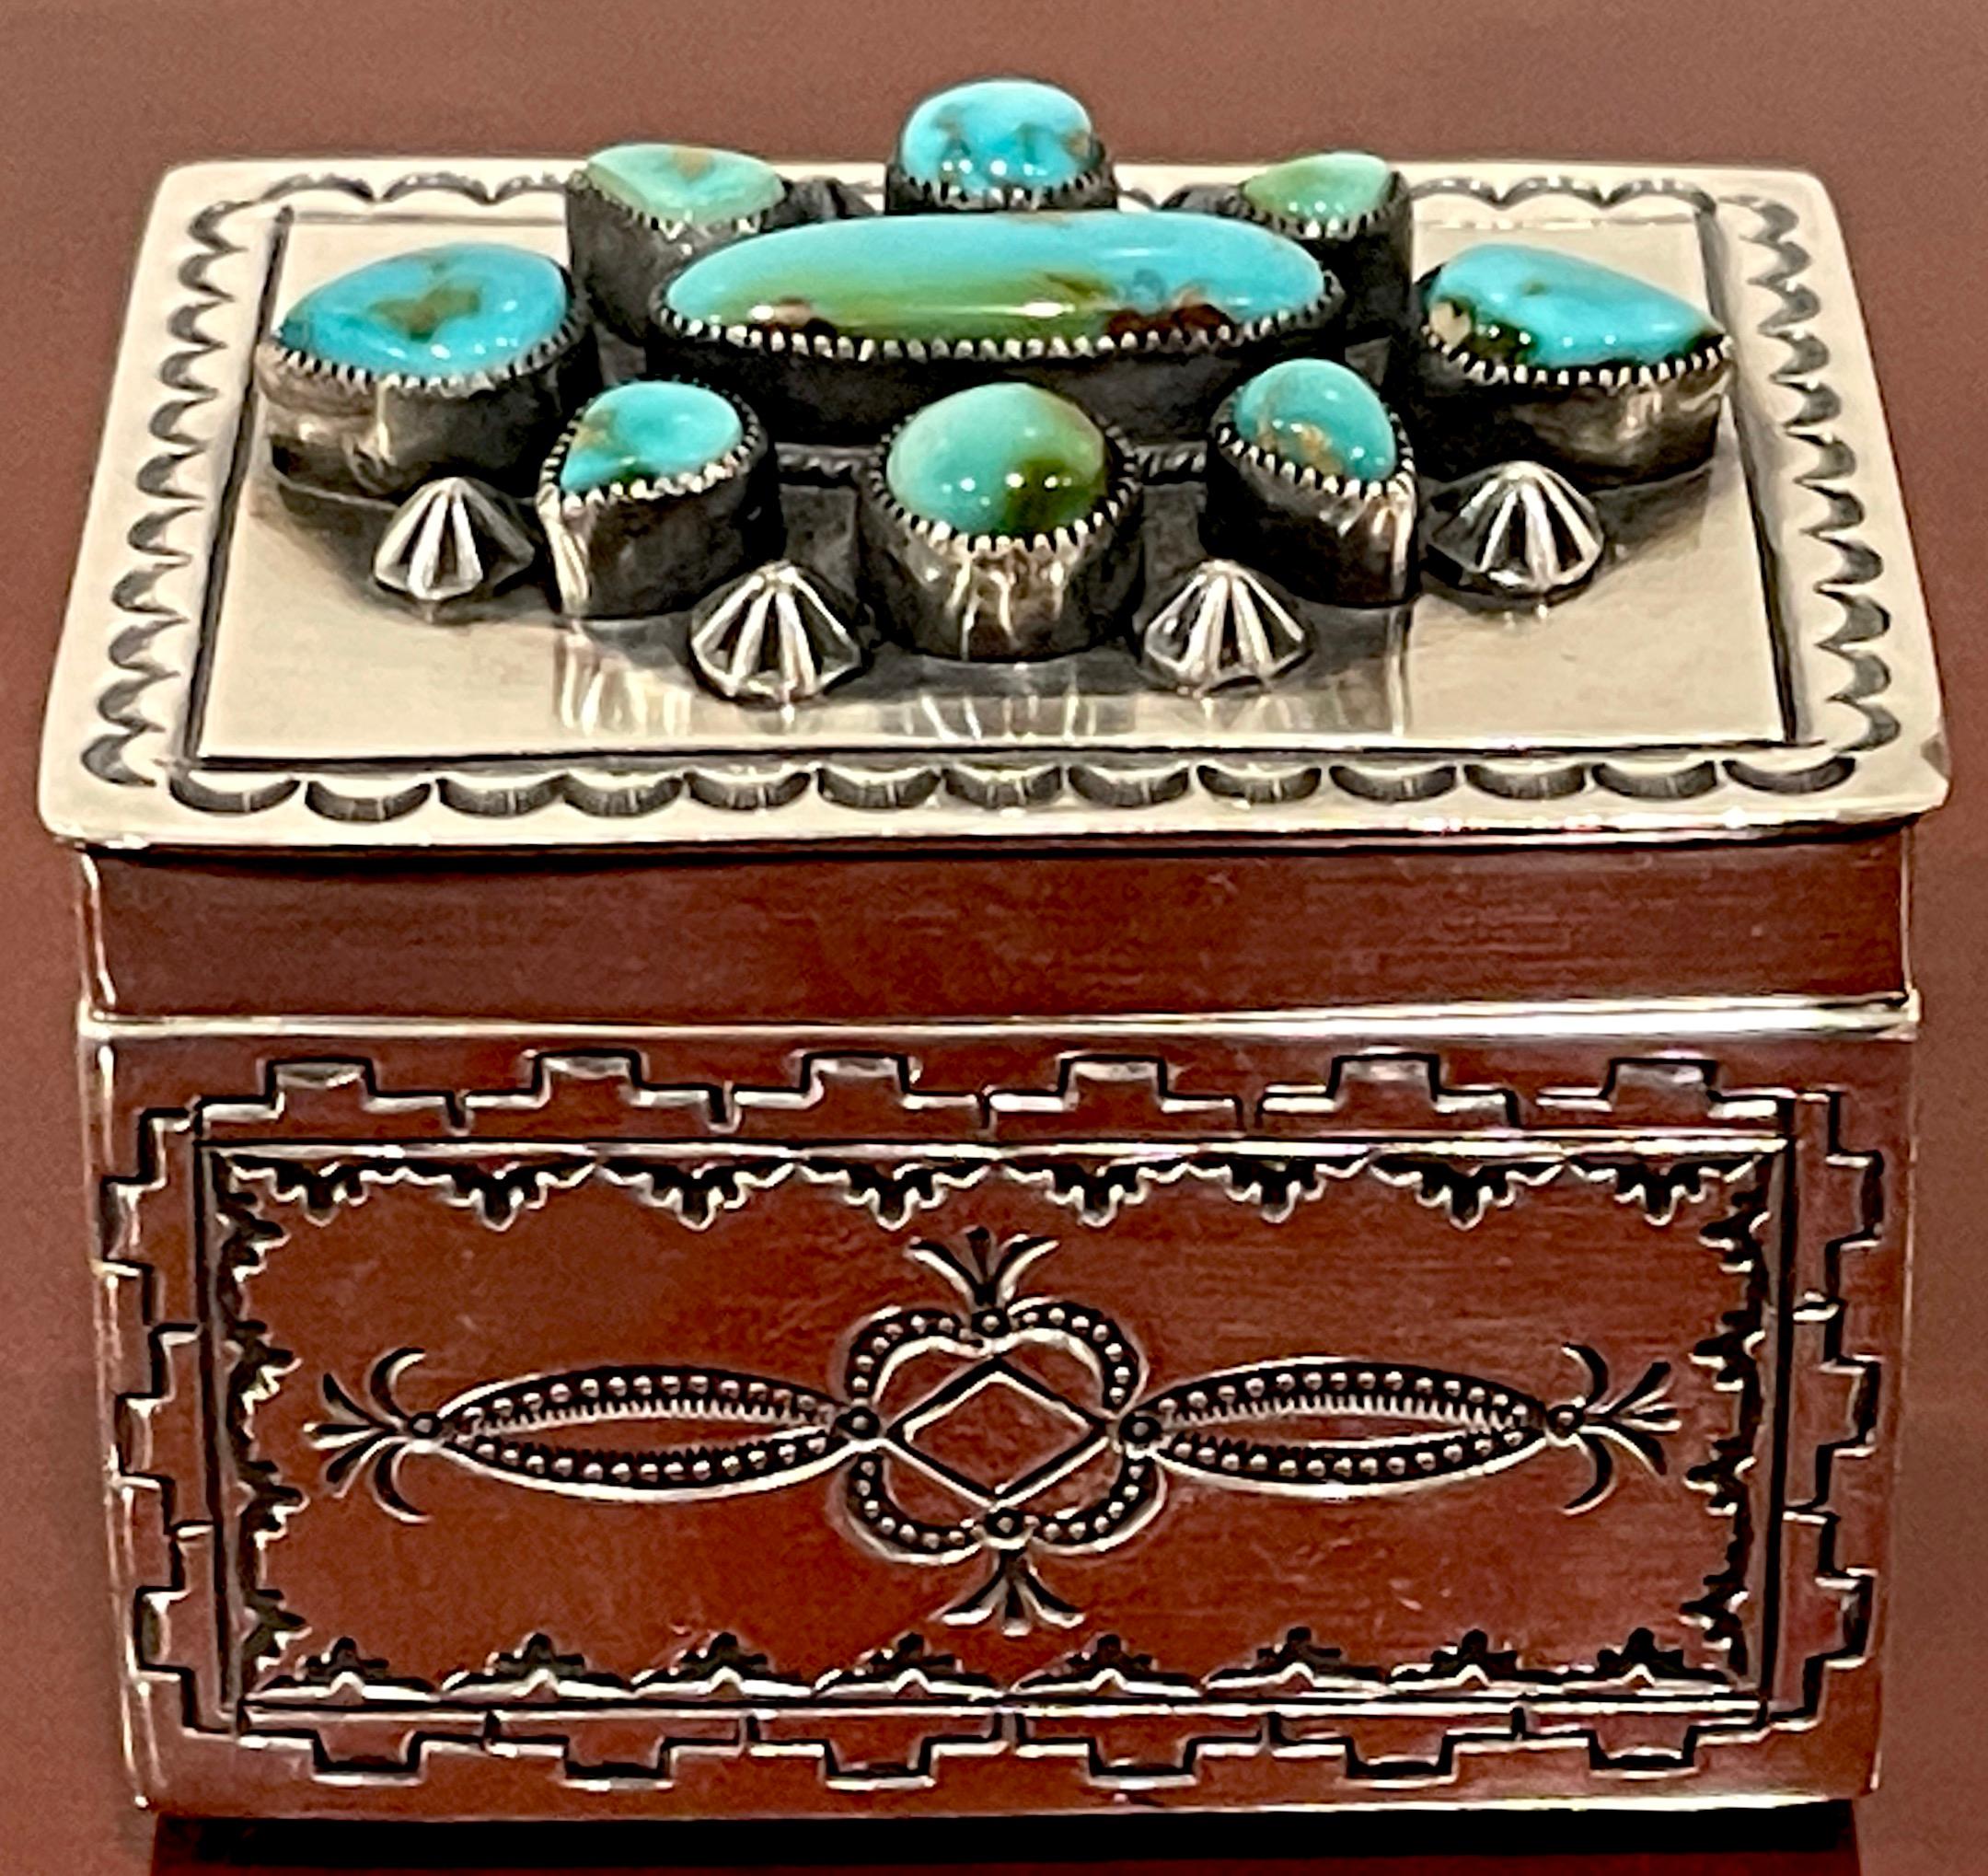 Navajo Sterling Silver & Turquoise Hinged Box, by Gary Reeves
Gary Reeves (1962-2014)
The Navajo sterling silver and turquoise hinged box, crafted by the renowned Navajo silversmith Gary Reeves (1962-2014), is a choice example of Native American